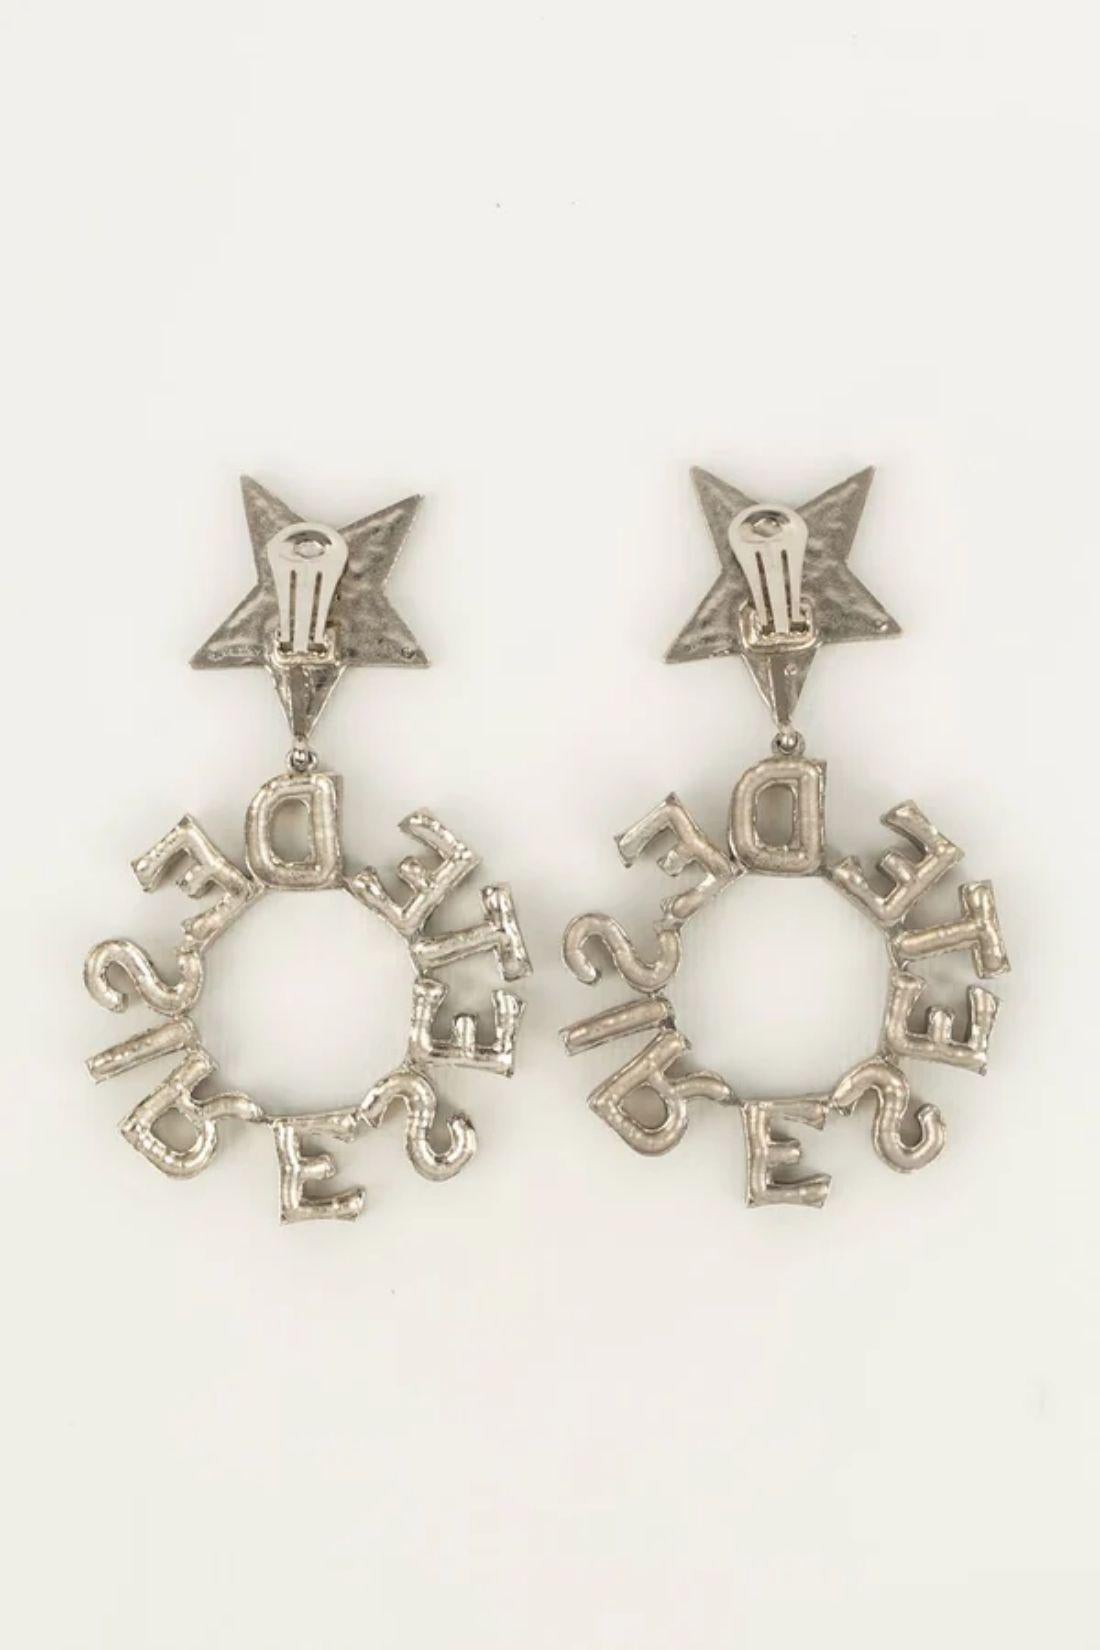 Yves Saint Laurent Earrings in Silver Plated Metal Paved with Rhinestones For Sale 1